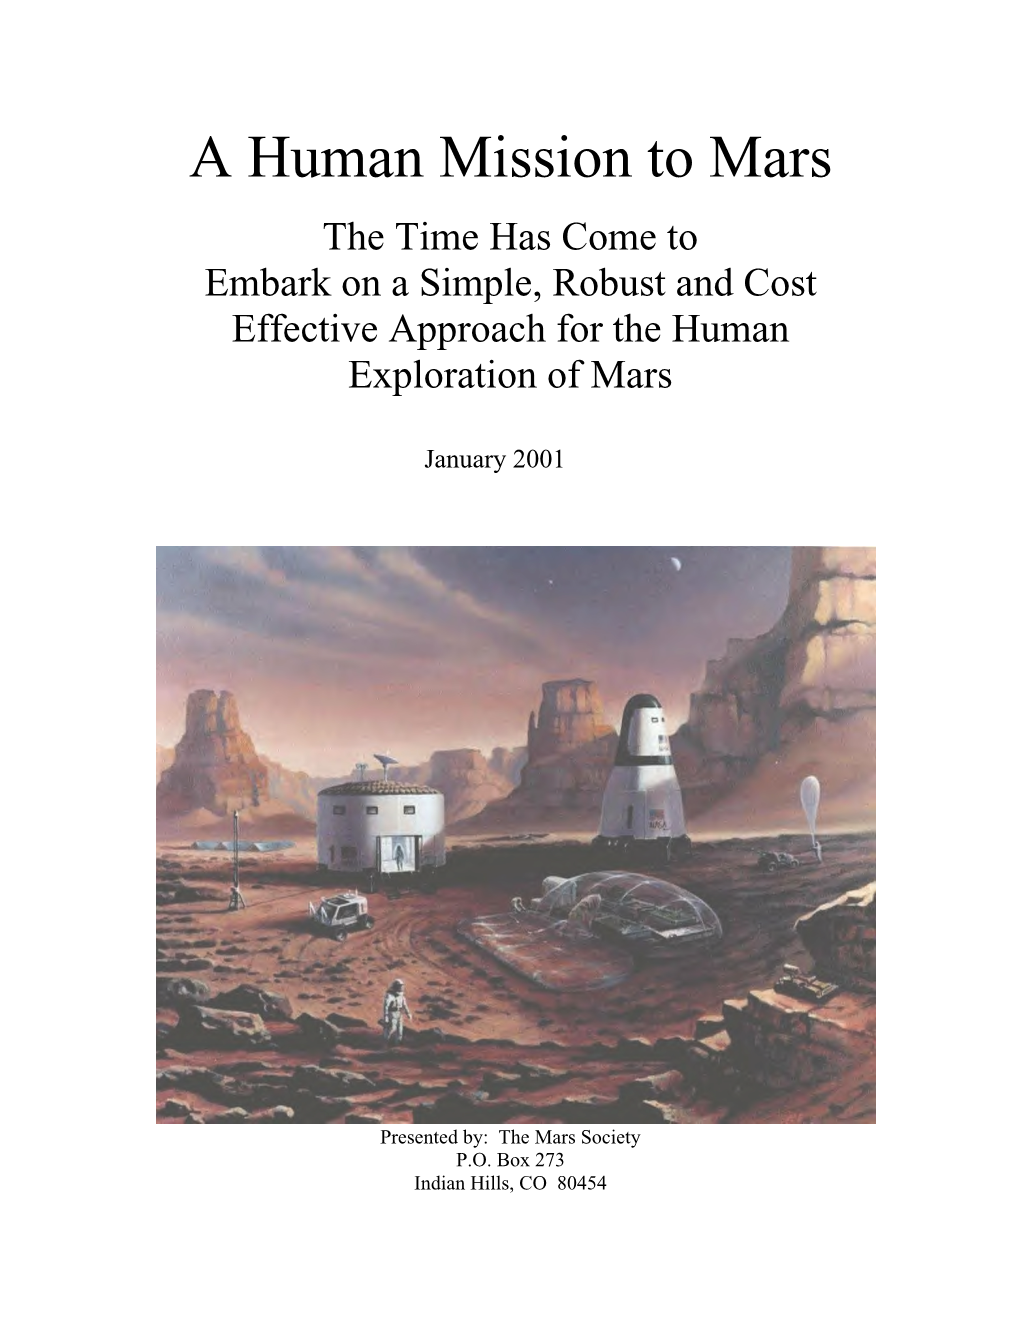 A Human Mission to Mars the Time Has Come to Embark on a Simple, Robust and Cost Effective Approach for the Human Exploration of Mars